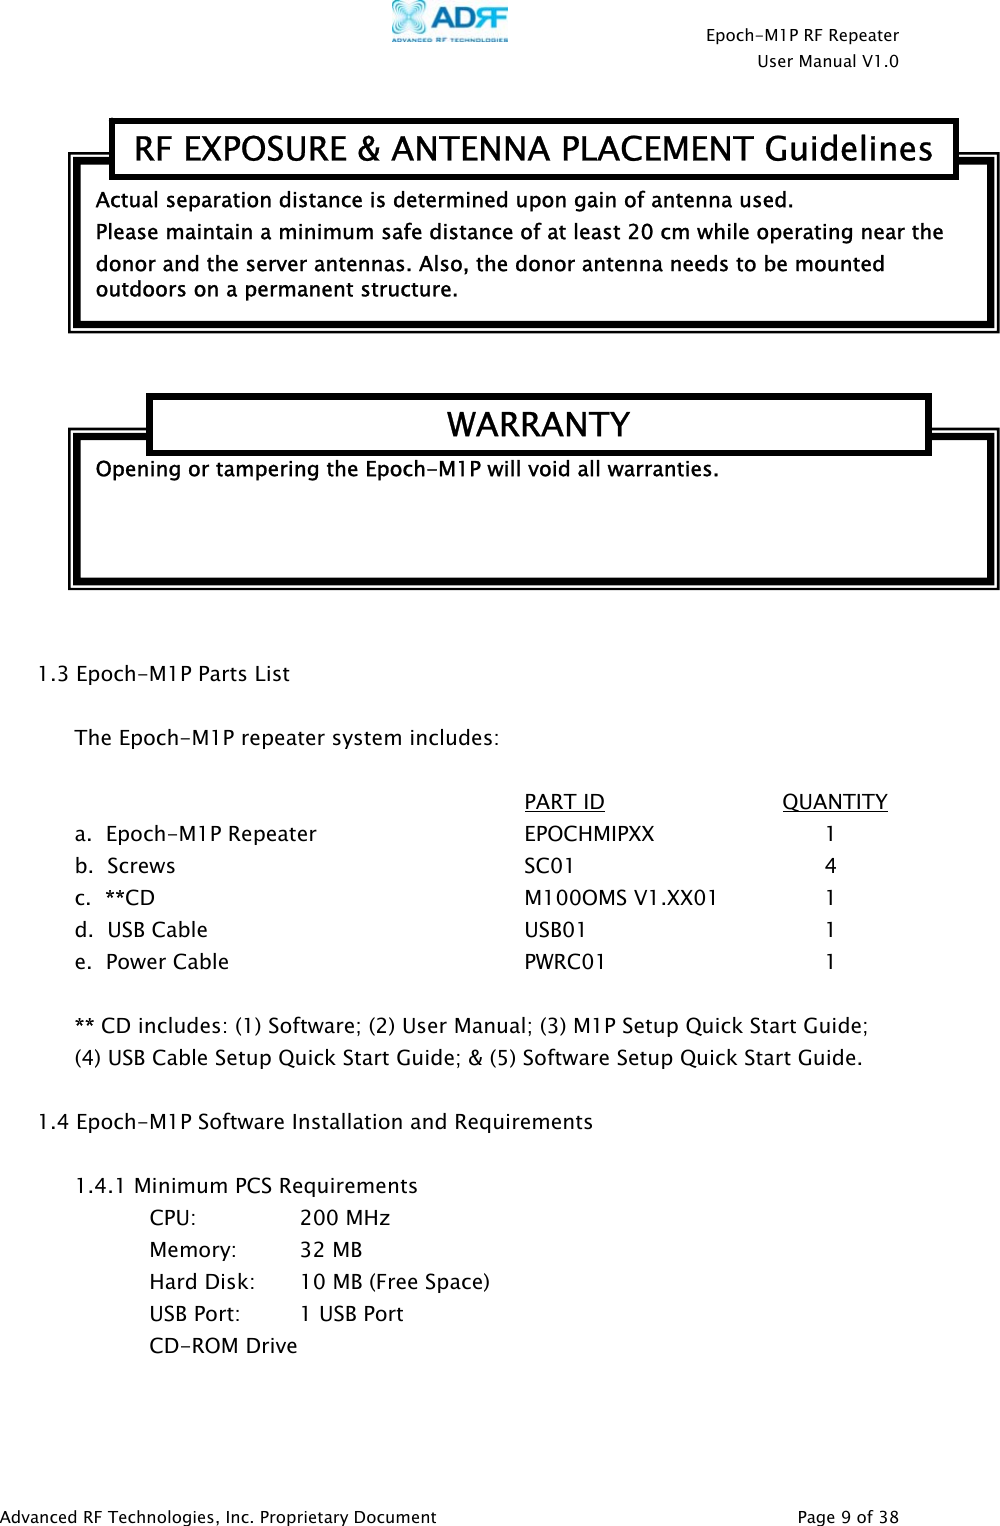    Epoch-M1P RF Repeater  User Manual V1.0      1.3 Epoch-M1P Parts List  The Epoch-M1P repeater system includes:        PART ID              QUANTITY a.  Epoch-M1P Repeater   EPOCHMIPXX   1  b.  Screws      SC01    4 c.  **CD     M100OMS V1.XX01  1 d.  USB Cable     USB01    1  e.  Power Cable    PWRC01   1  ** CD includes: (1) Software; (2) User Manual; (3) M1P Setup Quick Start Guide; (4) USB Cable Setup Quick Start Guide; &amp; (5) Software Setup Quick Start Guide.   1.4 Epoch-M1P Software Installation and Requirements  1.4.1 Minimum PCS Requirements CPU:     200 MHz   Memory: 32 MB     Hard Disk:  10 MB (Free Space)     USB Port:    1 USB Port   CD-ROM Drive    Actual separation distance is determined upon gain of antenna used. RF EXPOSURE &amp; ANTENNA PLACEMENT GuidelinesPlease maintain a minimum safe distance of at least 20 cm while operating near the donor and the server antennas. Also, the donor antenna needs to be mounted outdoors on a permanent structure. Opening or tampering the Epoch-M1P will void all warranties. WARRANTYAdvanced RF Technologies, Inc. Proprietary Document   Page 9 of 38  